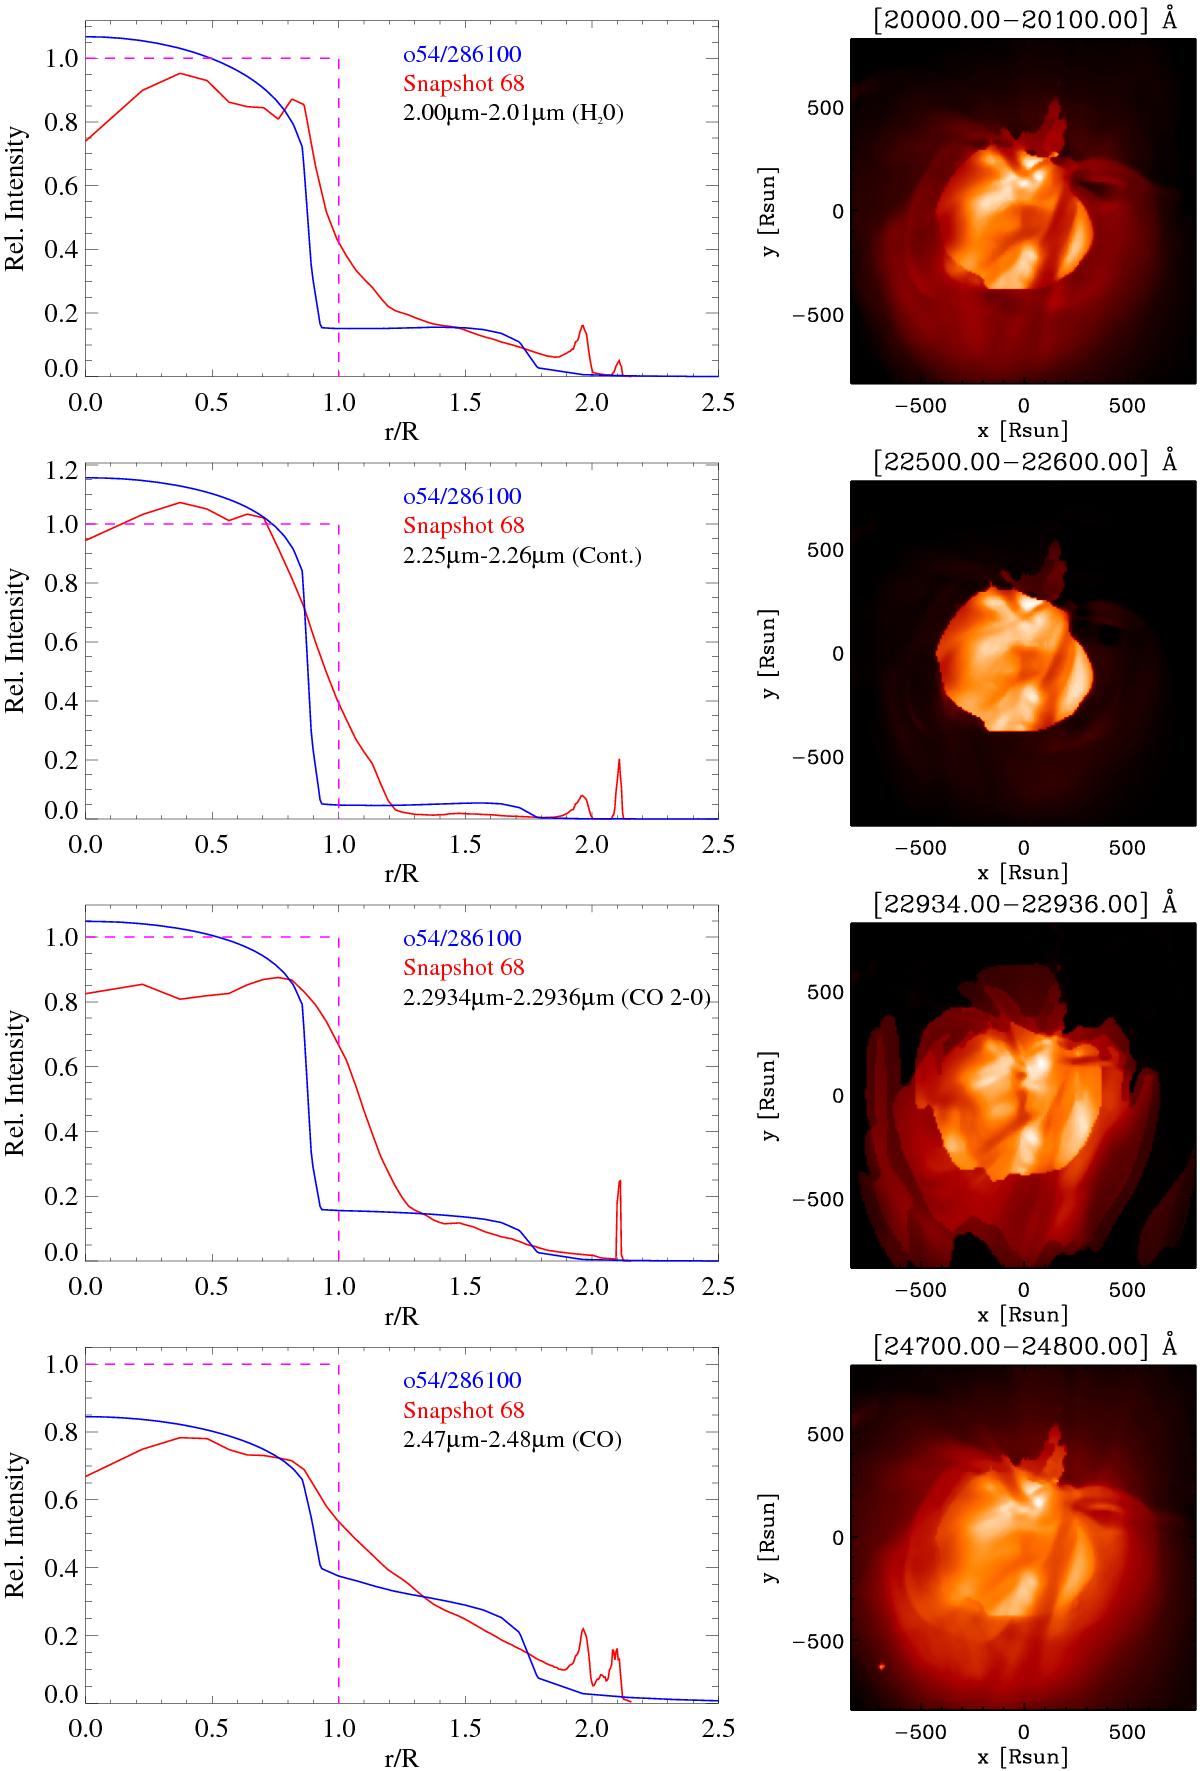 Near-infrared spectro-interferometry of Mira variables and comparisons to 1D dynamic model
                                      atmospheres and 3D convection simulations